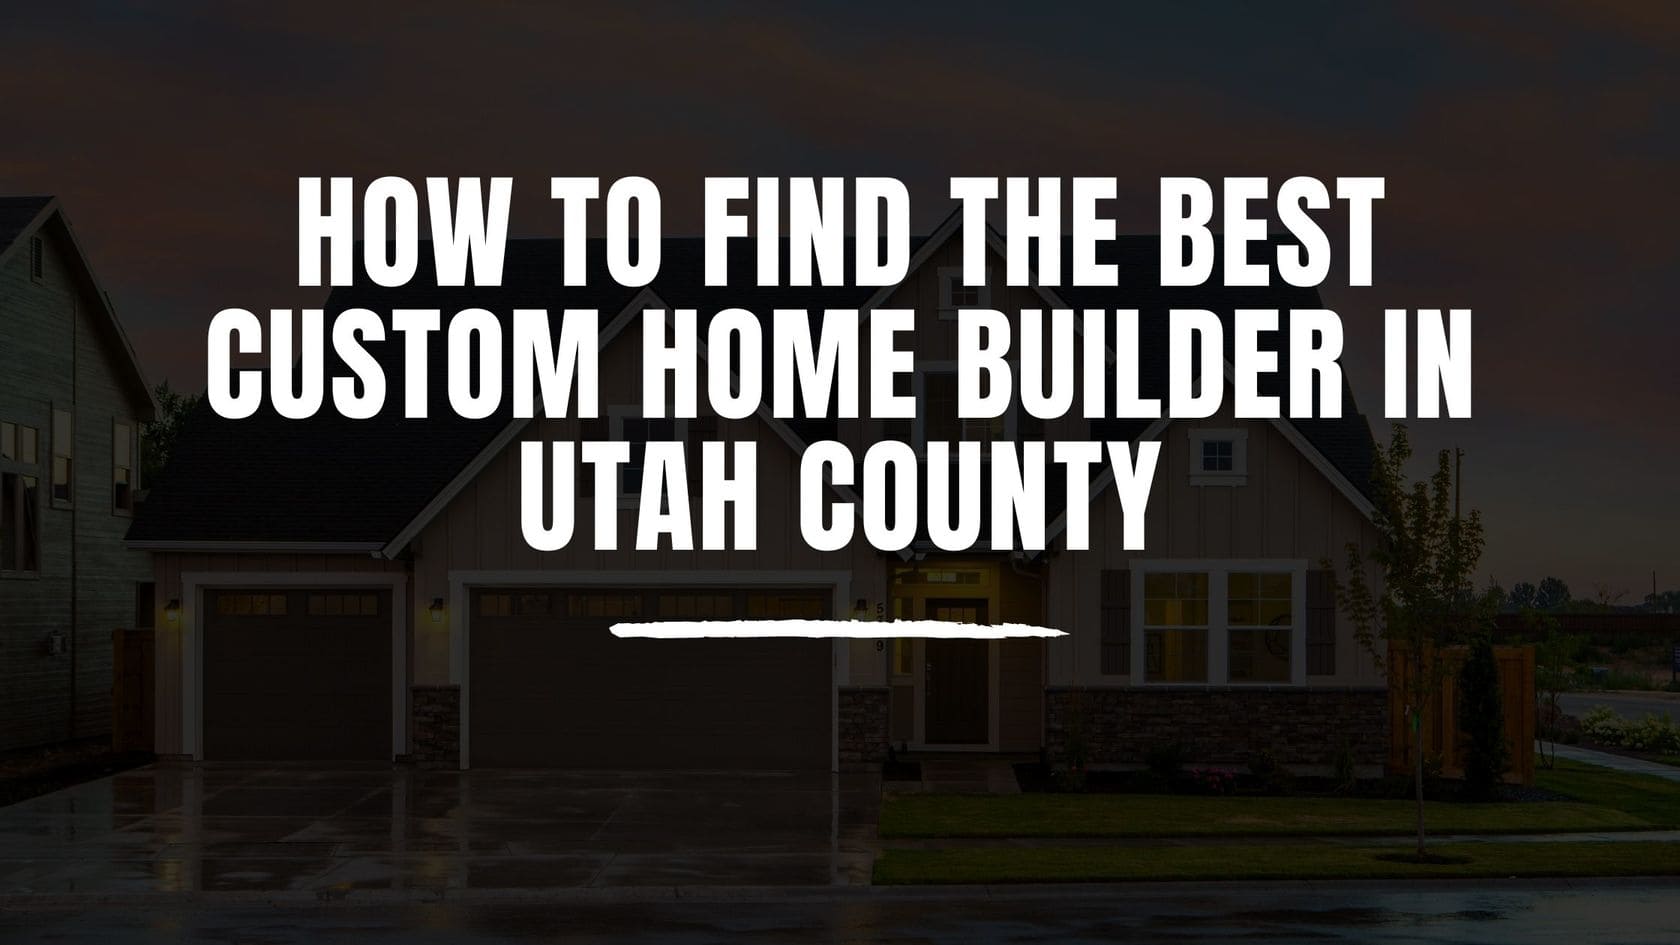 How To Find The Best Custom Home Builder in Utah County